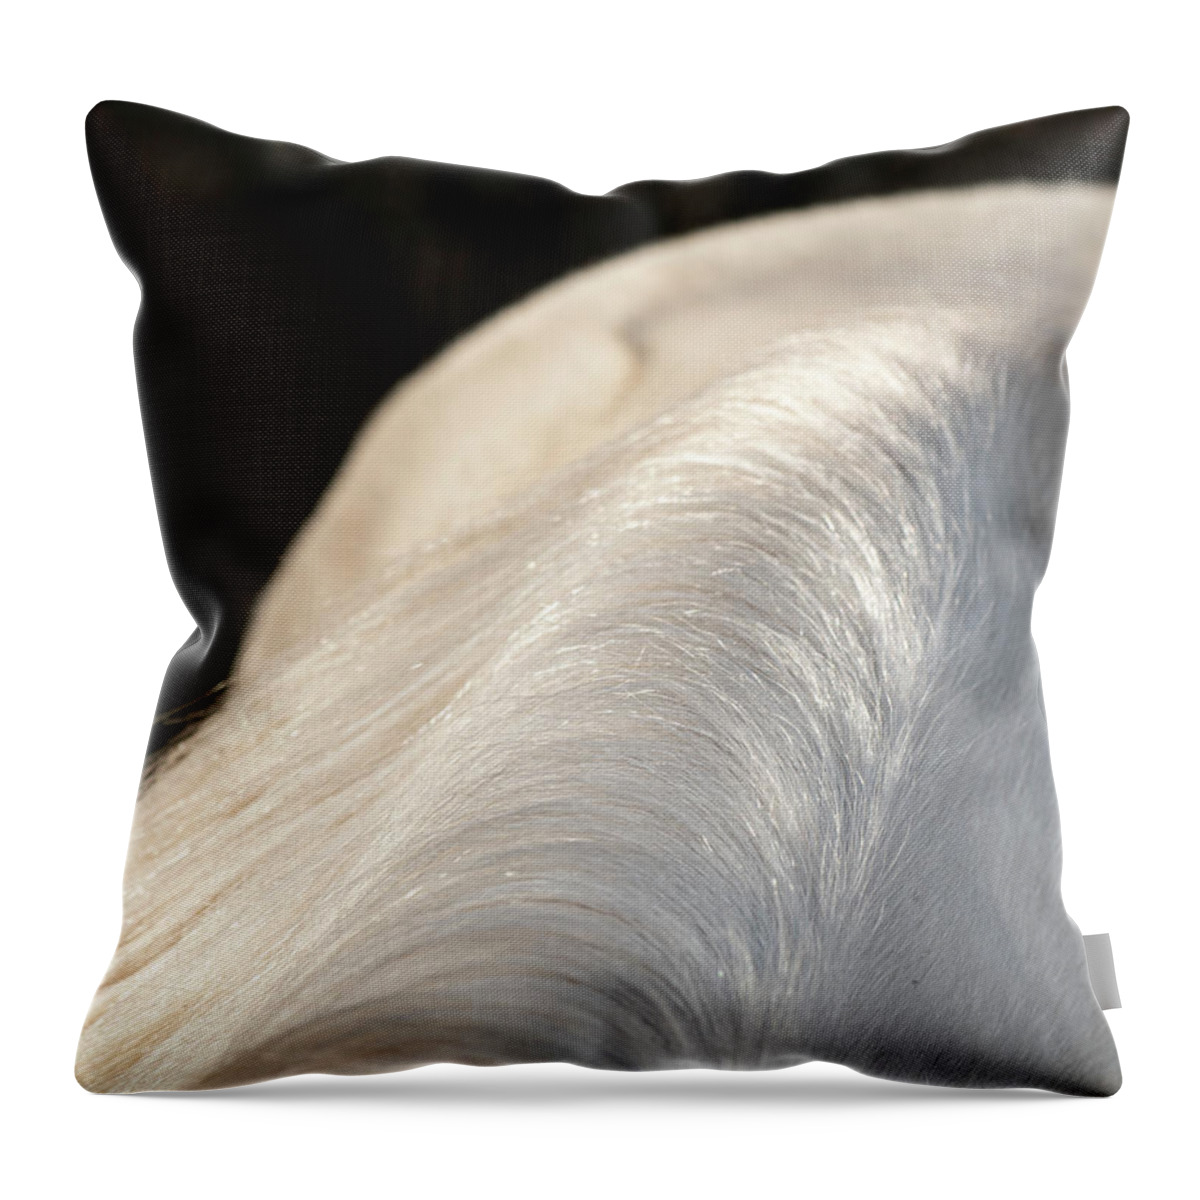 Abstract Throw Pillow featuring the photograph Mane Abstract by Karen Rispin